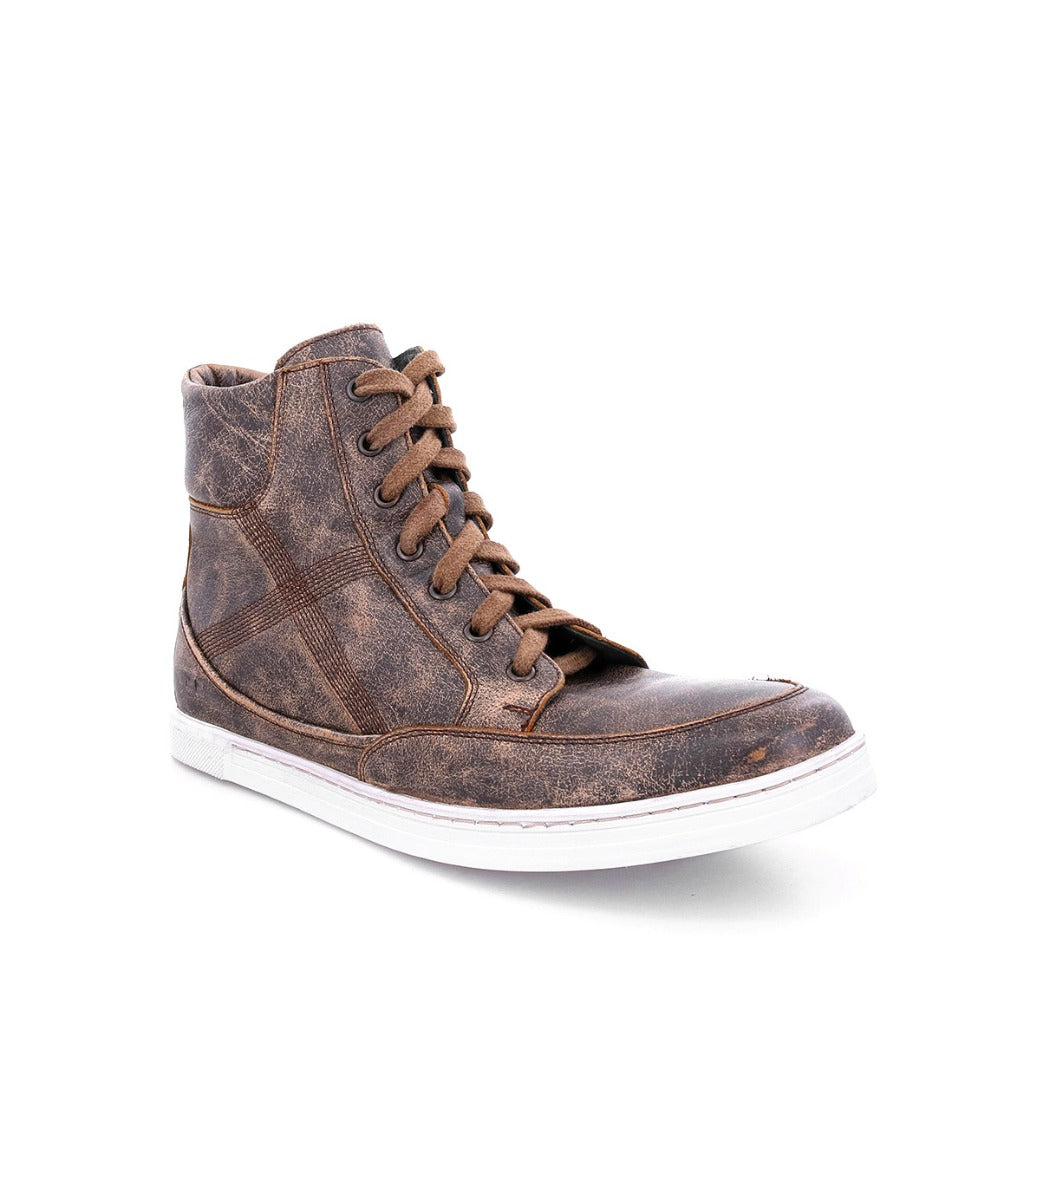 A men's Lordmind brown leather high top sneaker by Bed Stu.